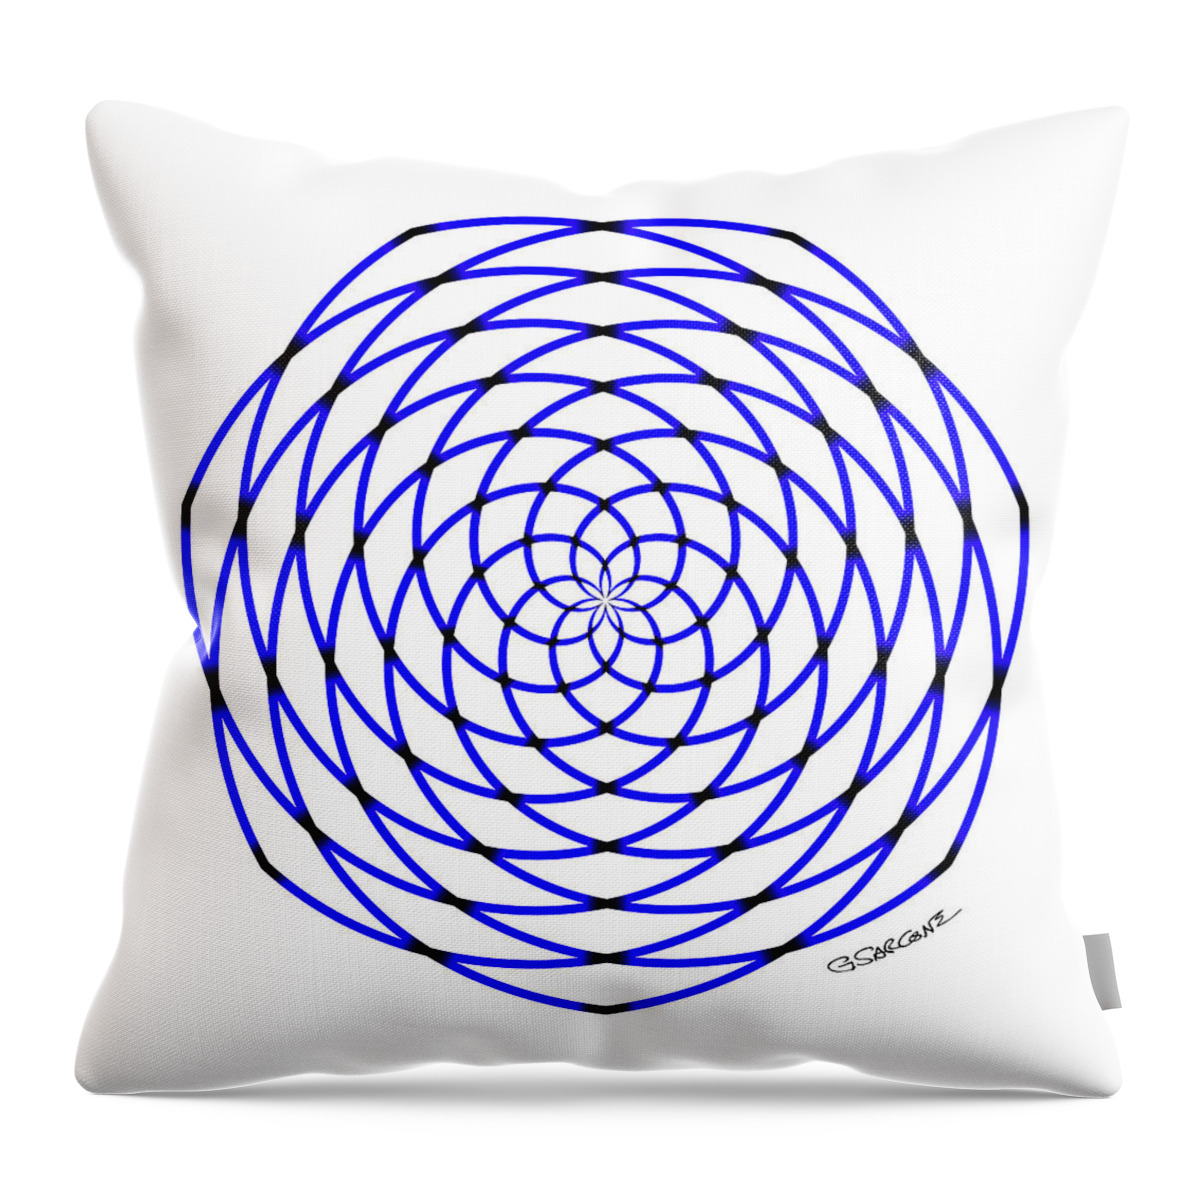 Op Art Throw Pillow featuring the mixed media Starburst 2 by Gianni Sarcone